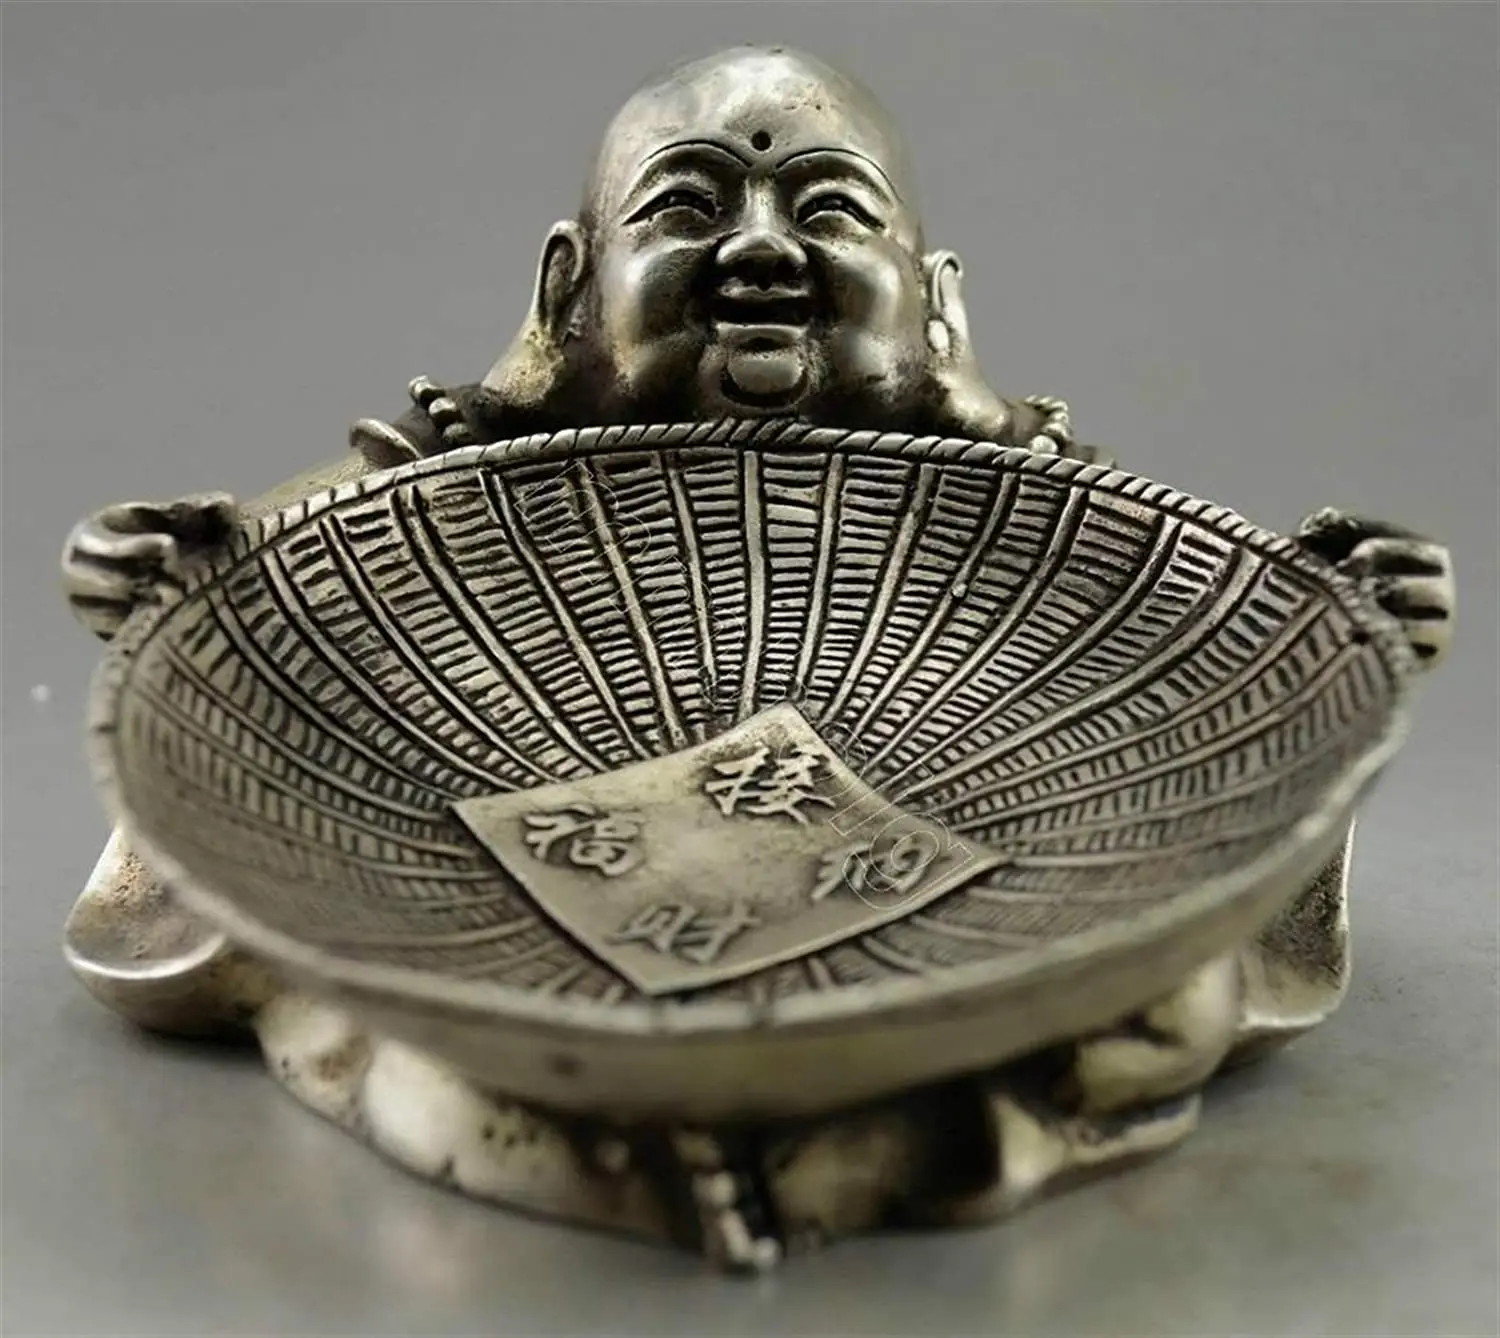 

Uongfi Buddha Collectible Decorate Old Handwork Tibet Silver Carved Buddha Hold Dustpan Statue